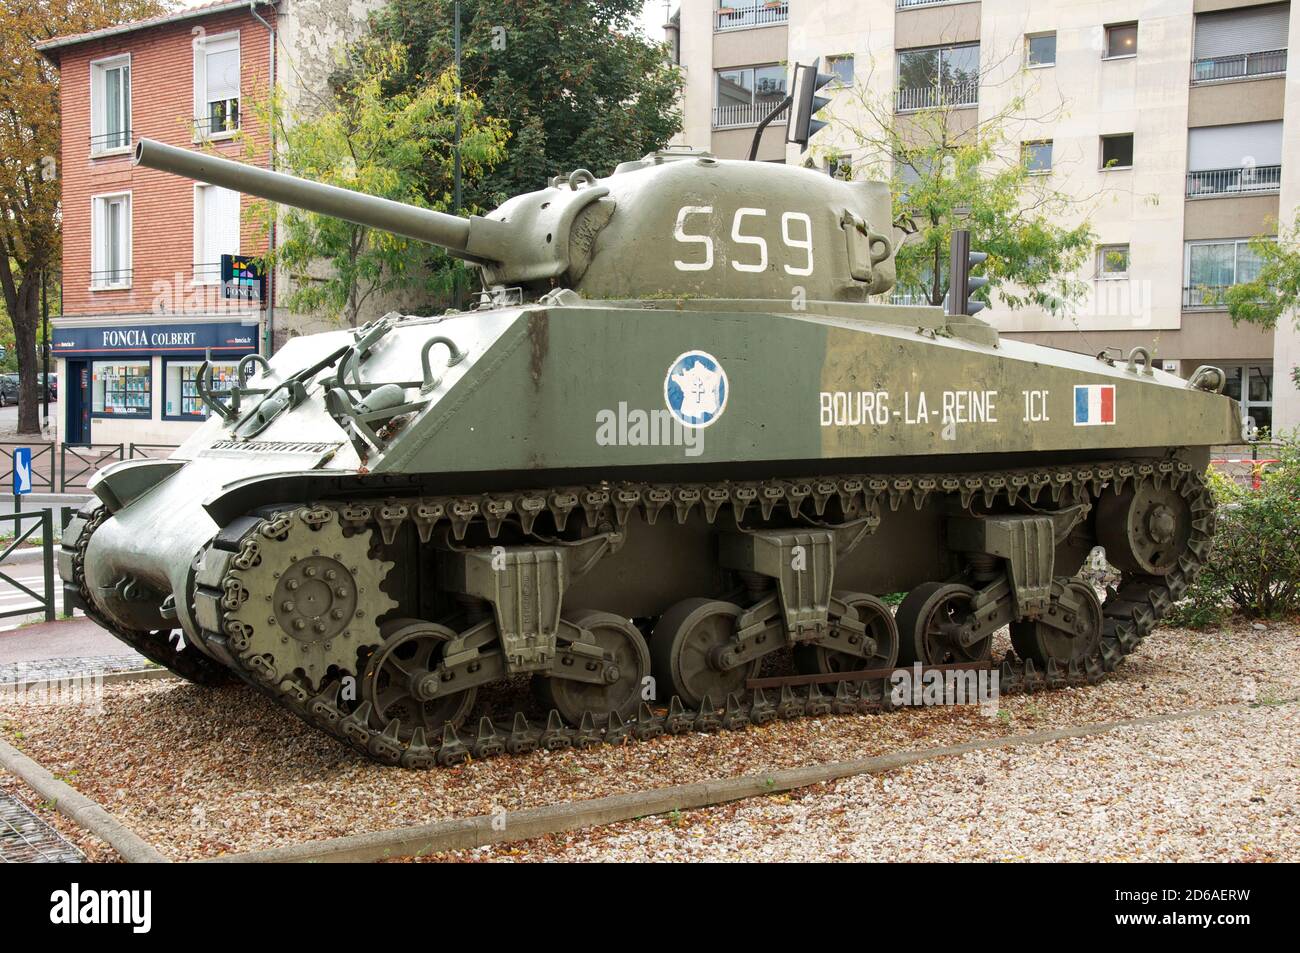 A Sherman tank stands beside the Avenue du Général Leclerc in Bourg-la-Reine. On 25th August 1944 Free French forces passed this way to liberate Paris. Stock Photo